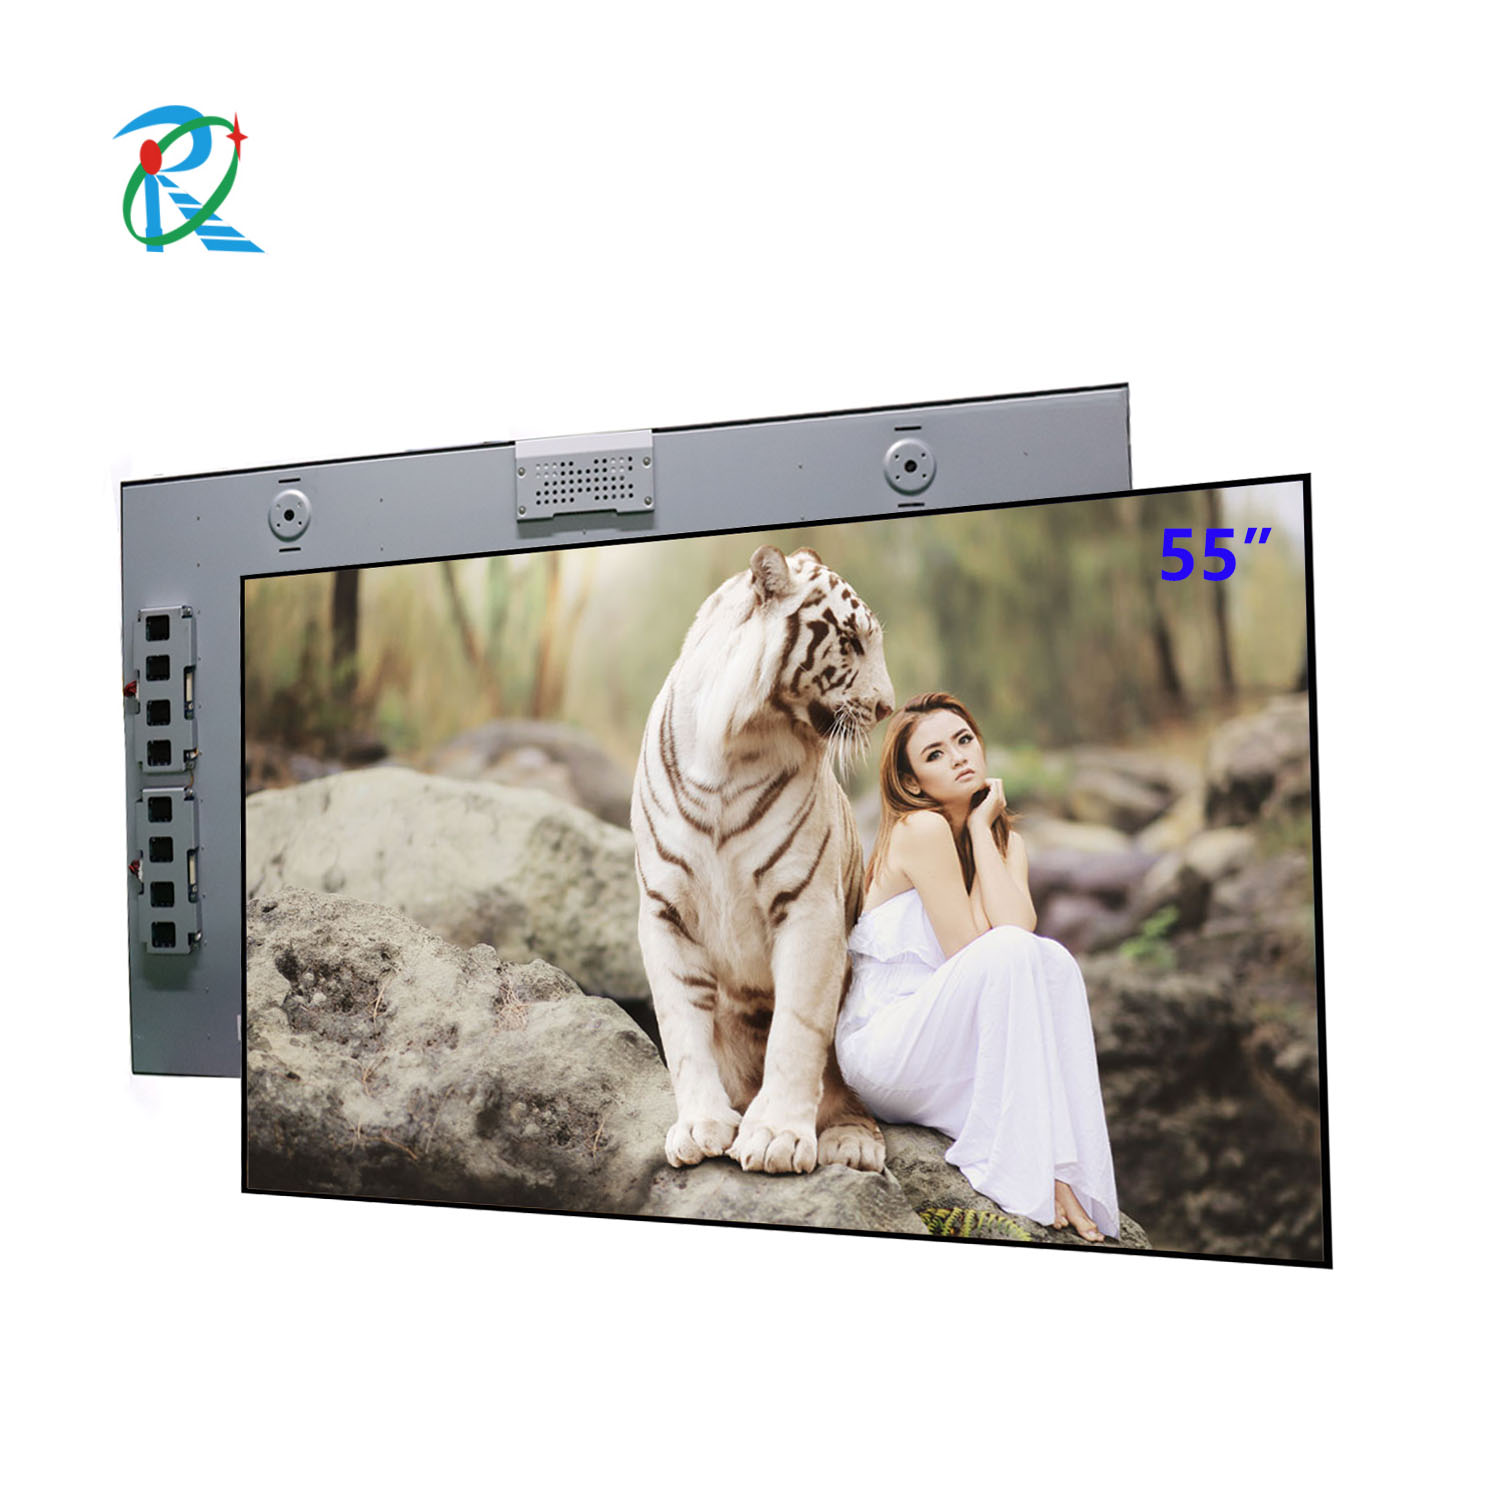 1920*1080(RGB) 55 inch High Brightness 500-5000nits HD LCD Screen  For Outdoor TV Show